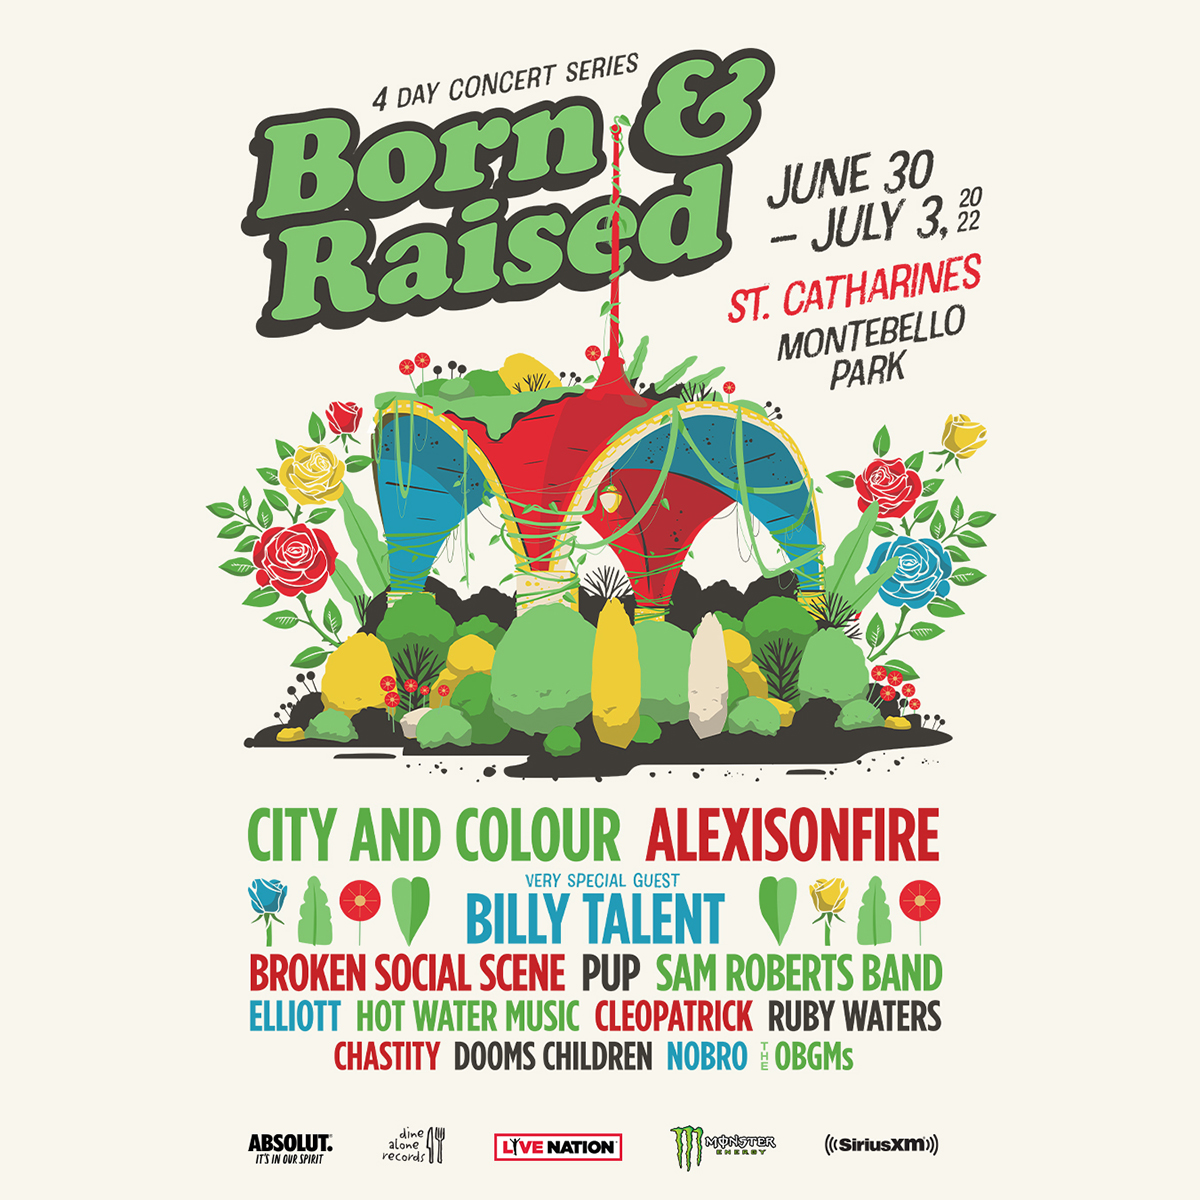 City And Colour + Alexisonfire Announce a 4 Day Concert Series  in their Hometown